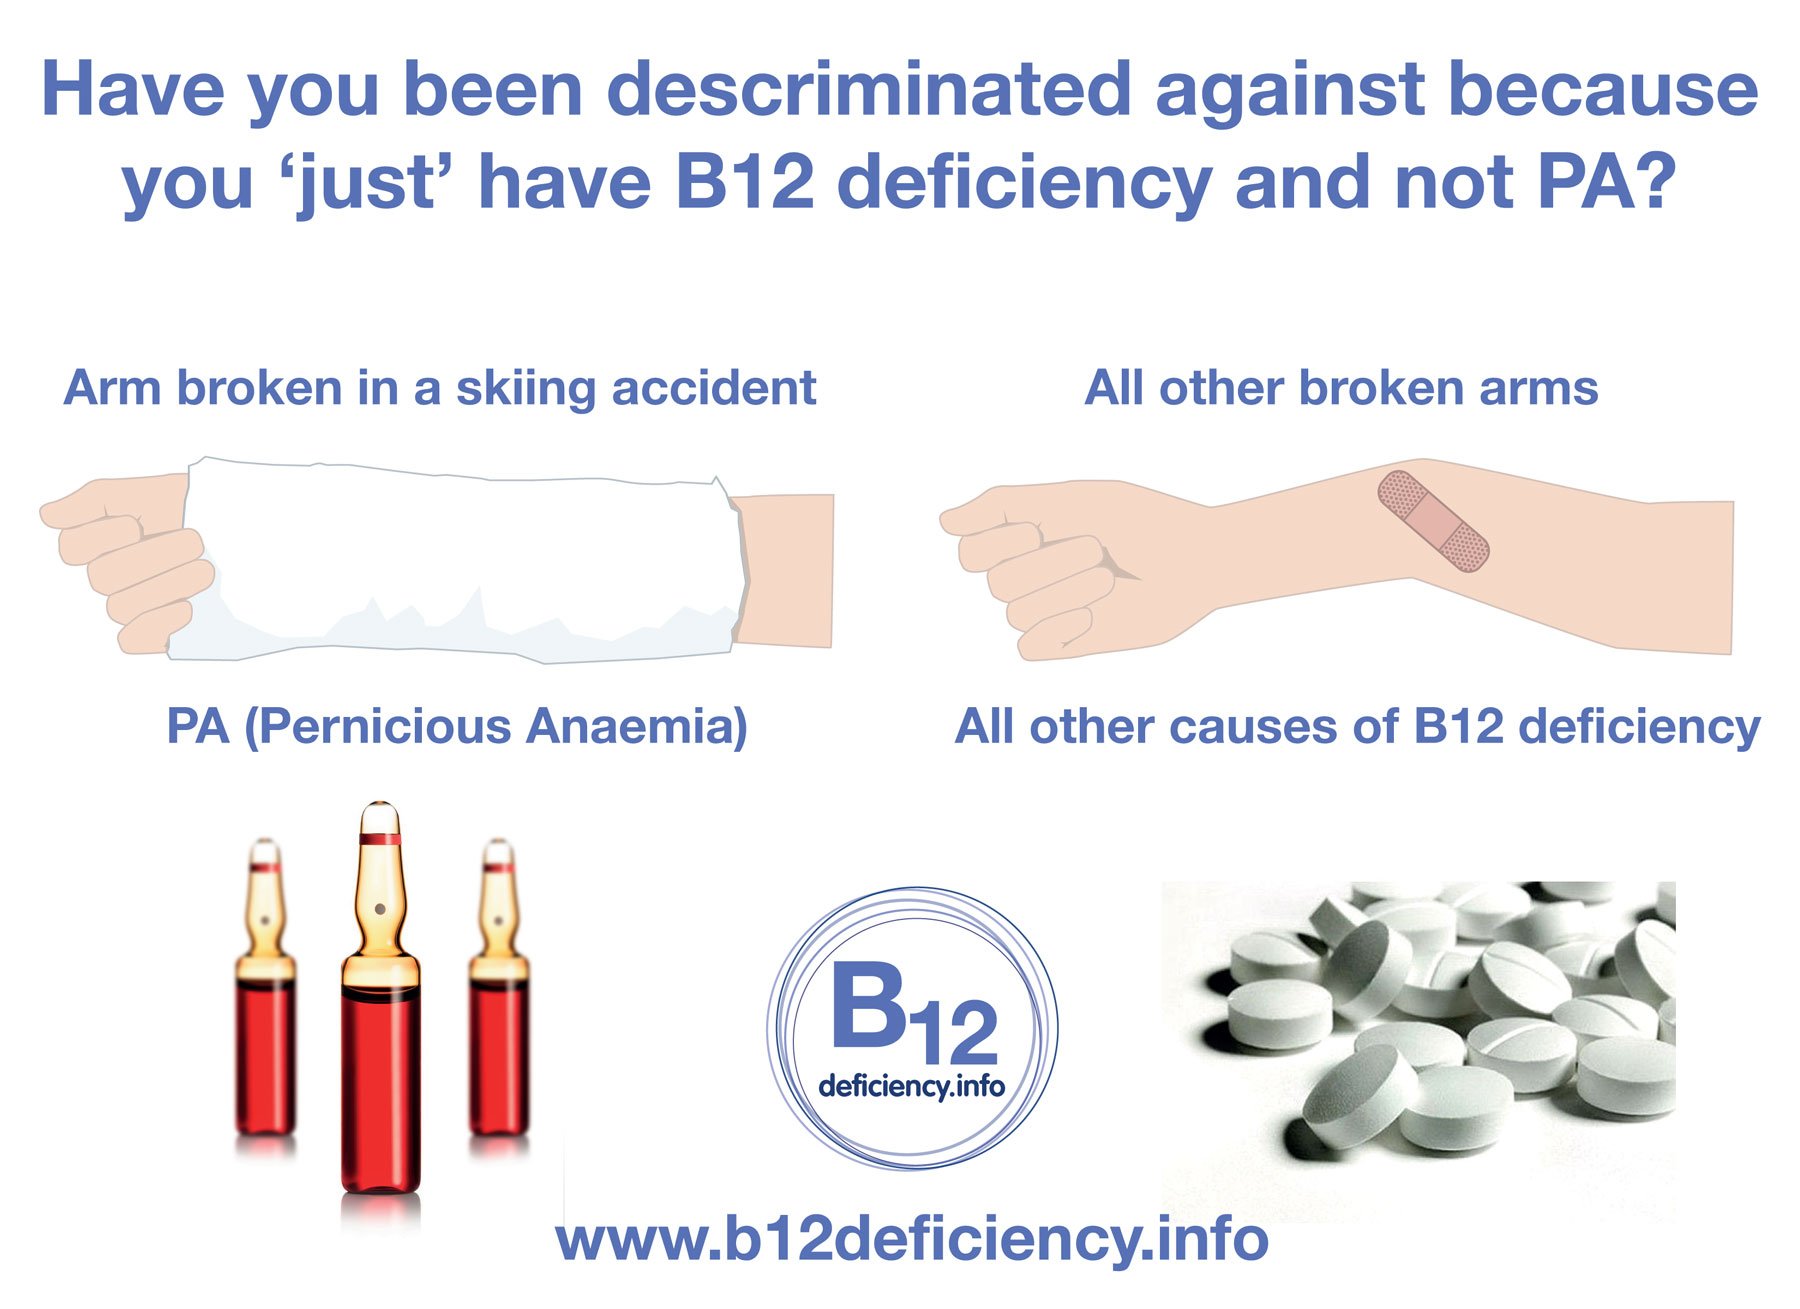 Pernicious anaemia (PA) or B12 deficiency – which is worse?